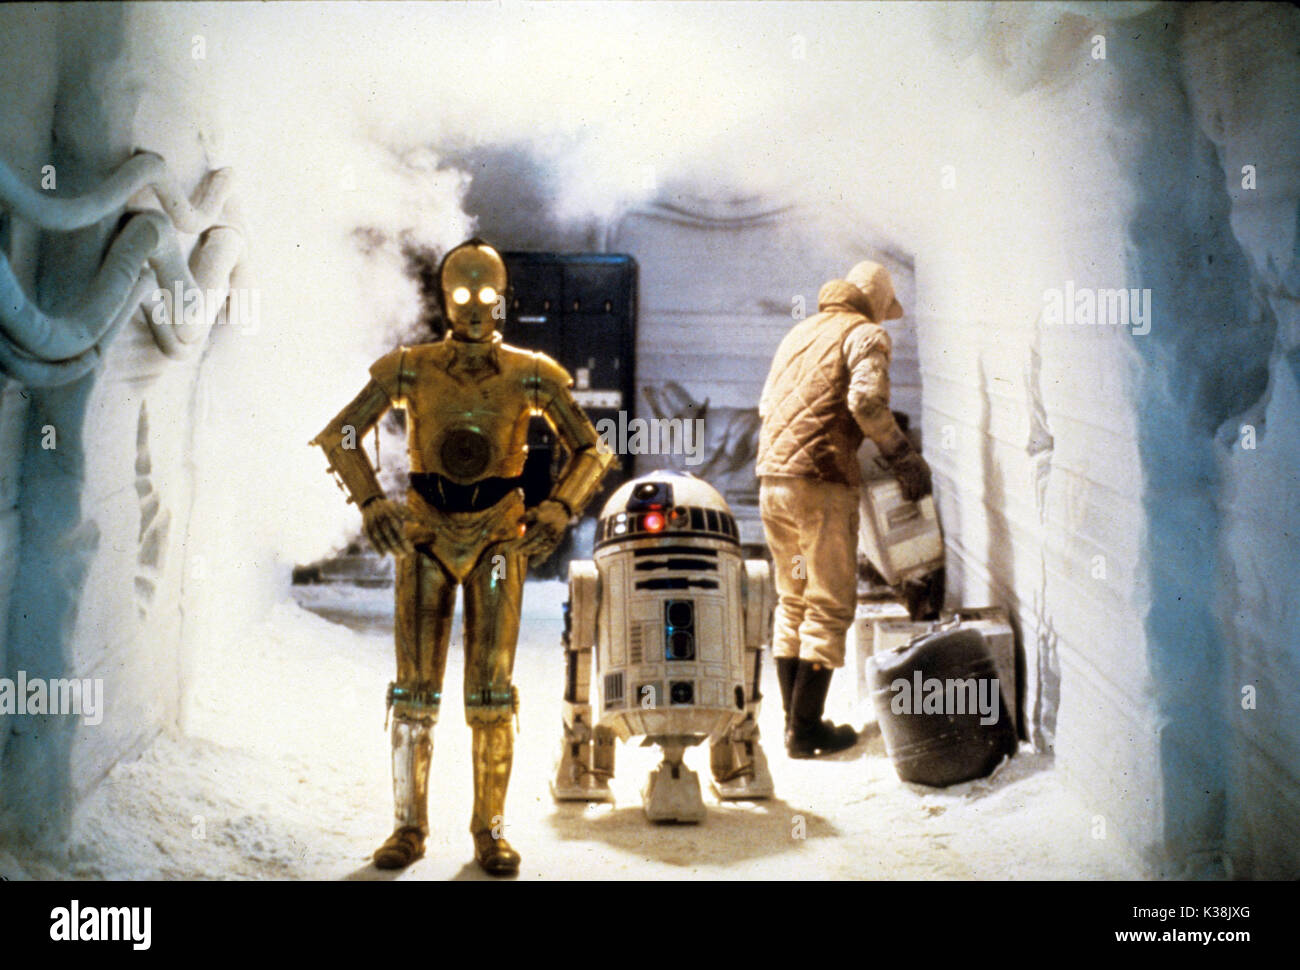 STAR WARS: EPISODE V - THE EMPIRE STRIKES BACK C-3PO performed by ANTHONY DANIELS, HARRISON FORD as Han Solo STAR WARS: EPISODE V - THE EMPIRE STRIKES BACK Stock Photo